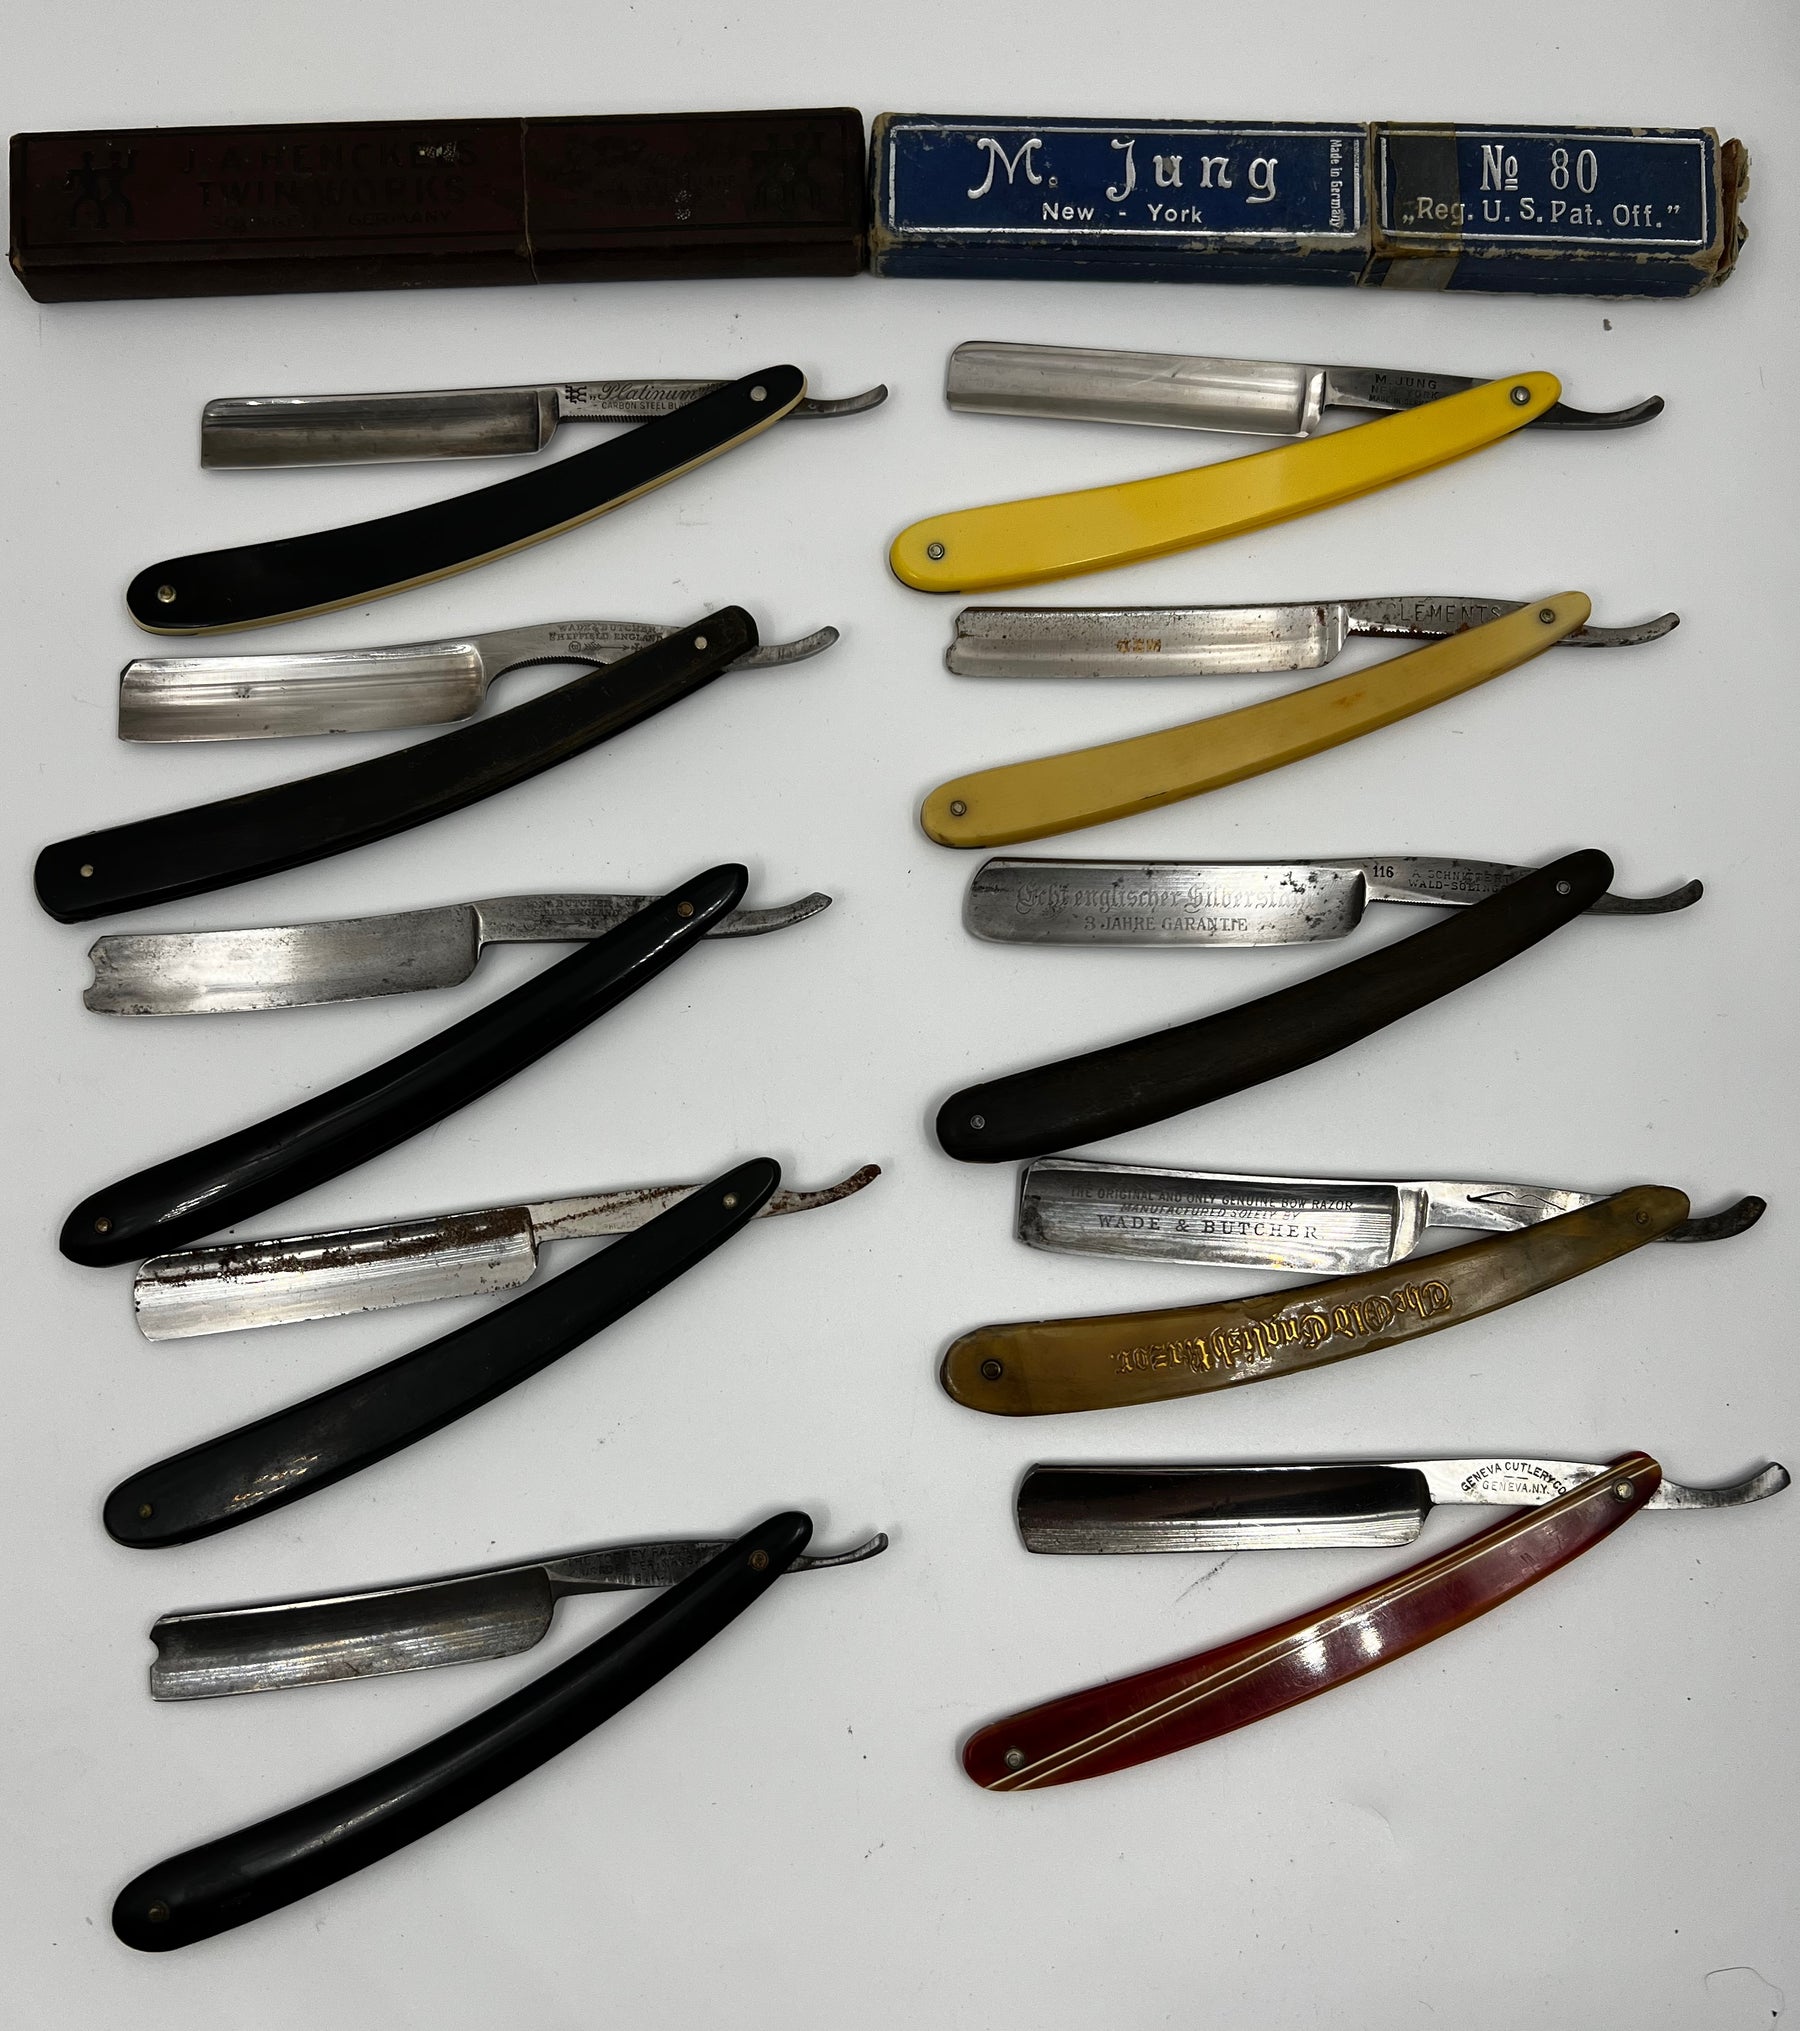 Vintage 10 Straight Razor Lot #29 - May Contain Sheffield, Solingen, Japanese & USA makers, as pictured